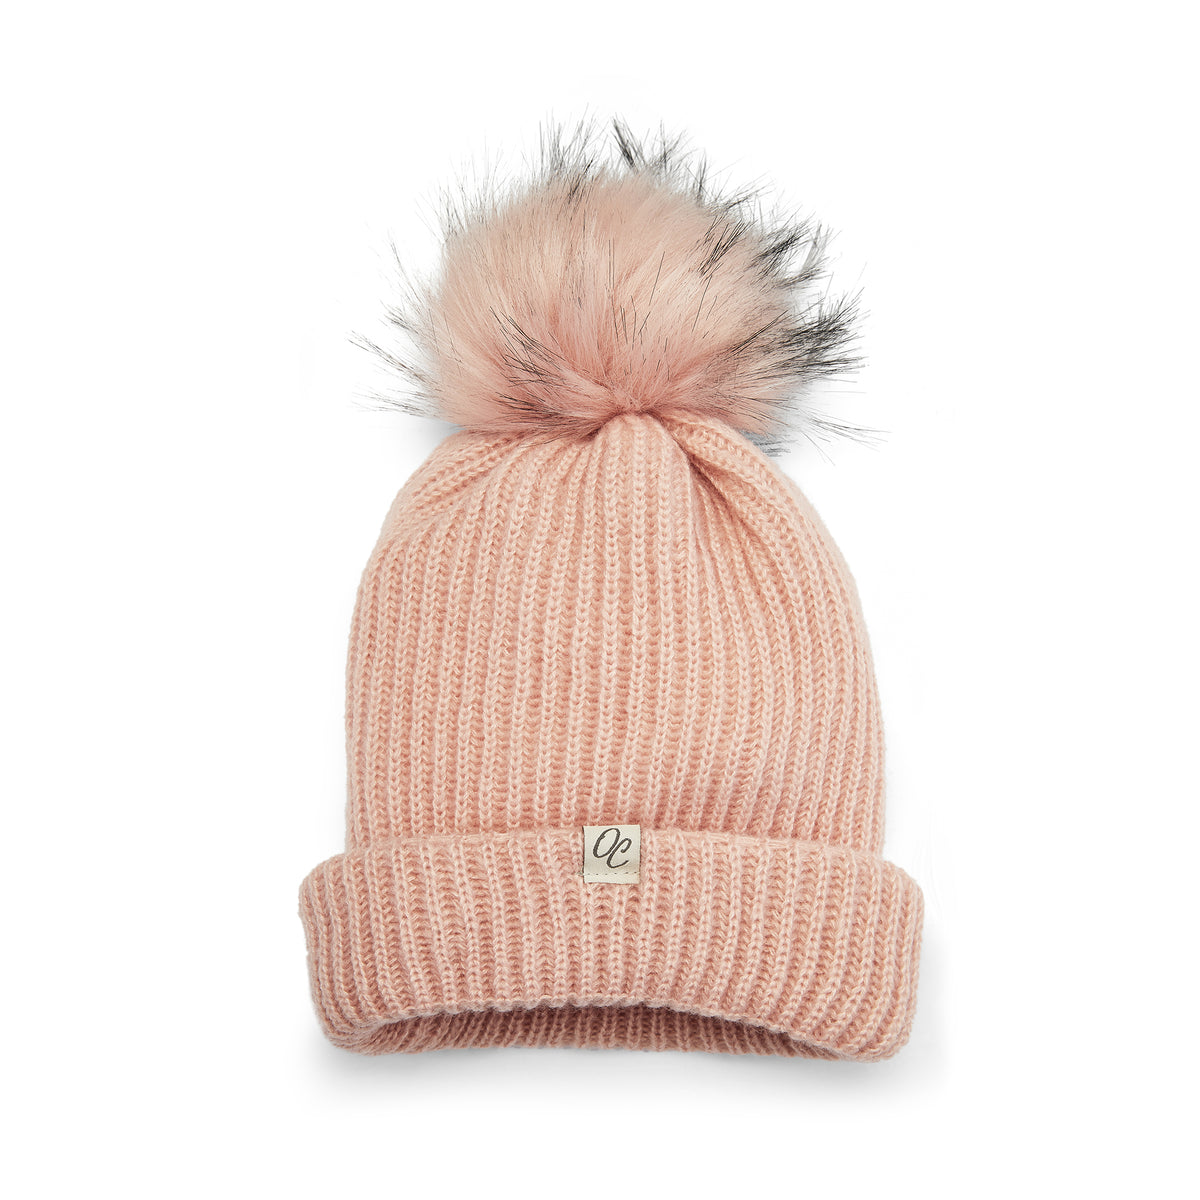 Only Curls Satin Lined Knitted Pink Beanie Hat with the pink pom pom